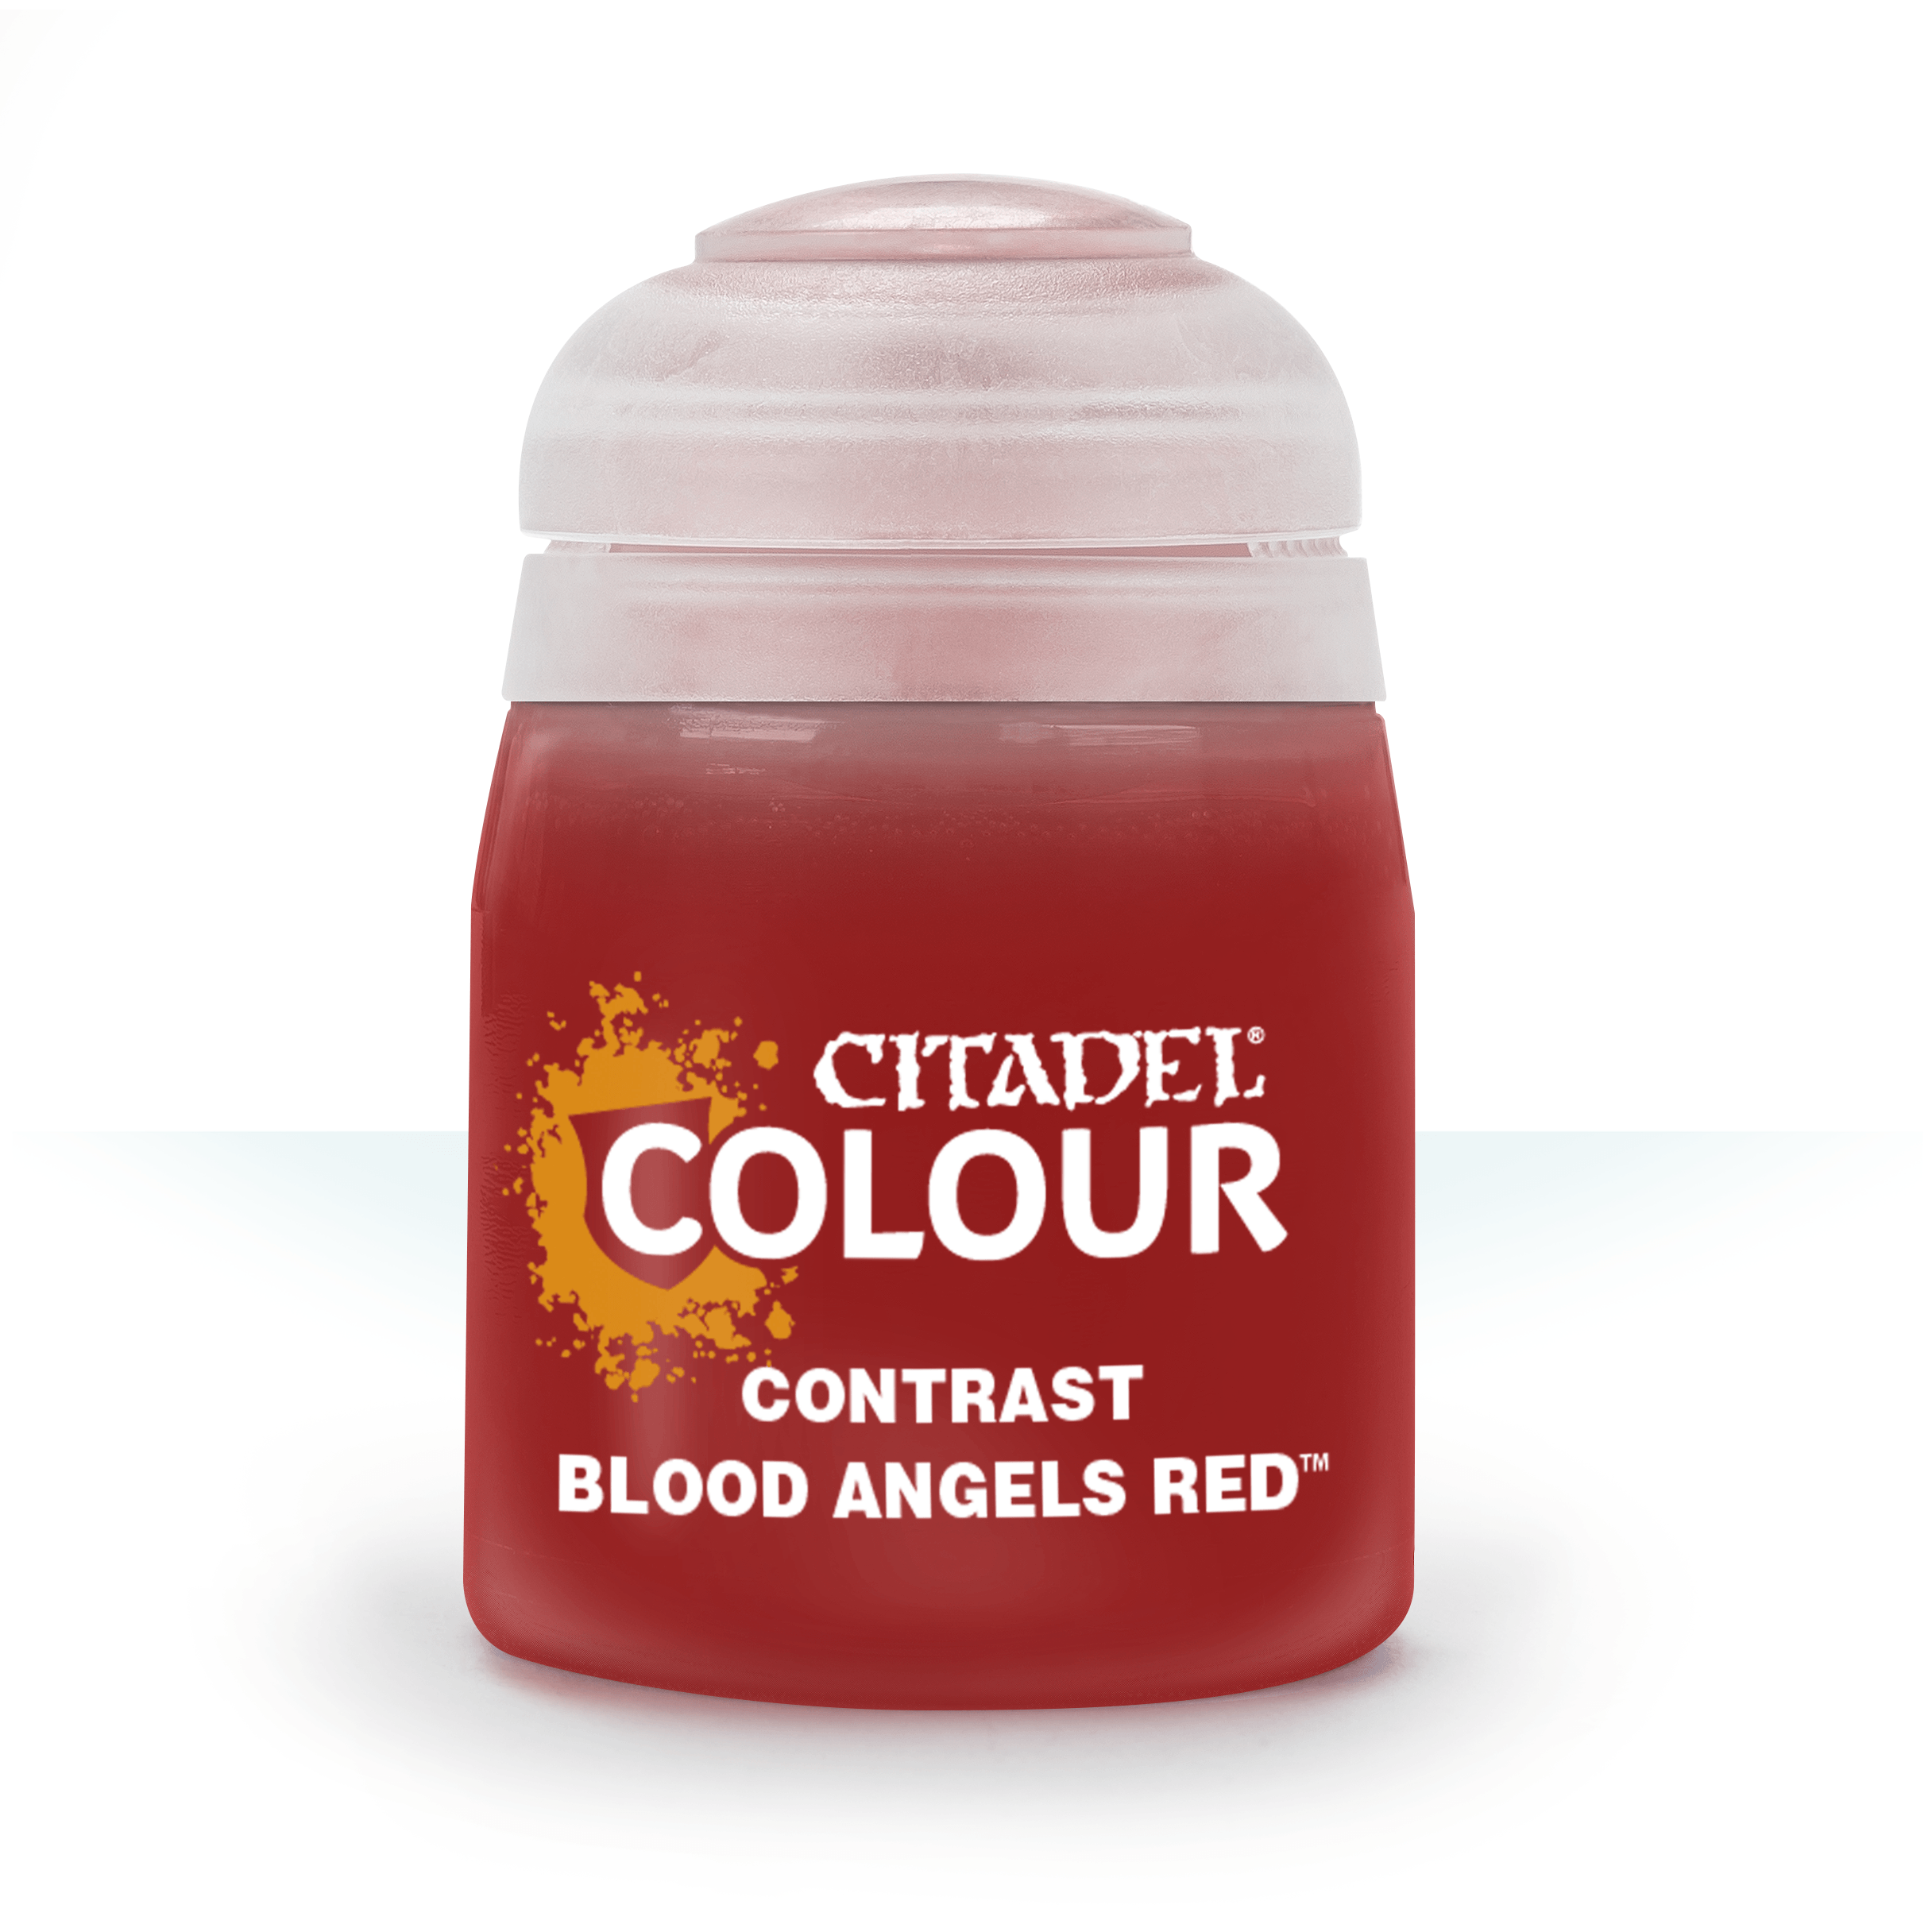 Cidadel contrast: BLOOD ANGELS RED